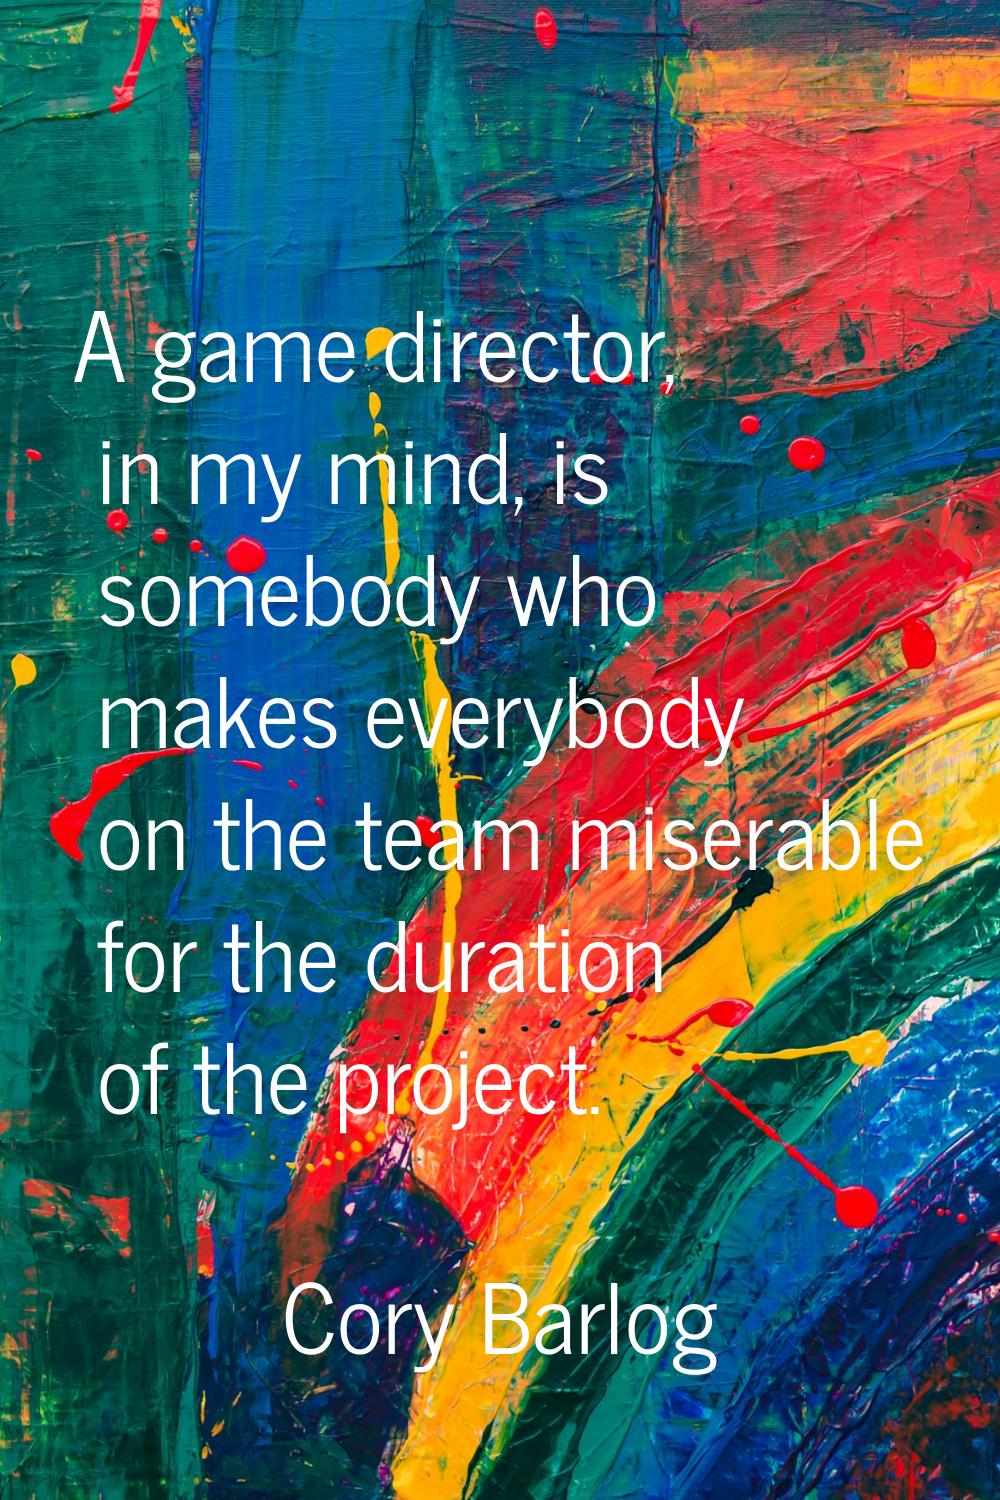 A game director, in my mind, is somebody who makes everybody on the team miserable for the duration